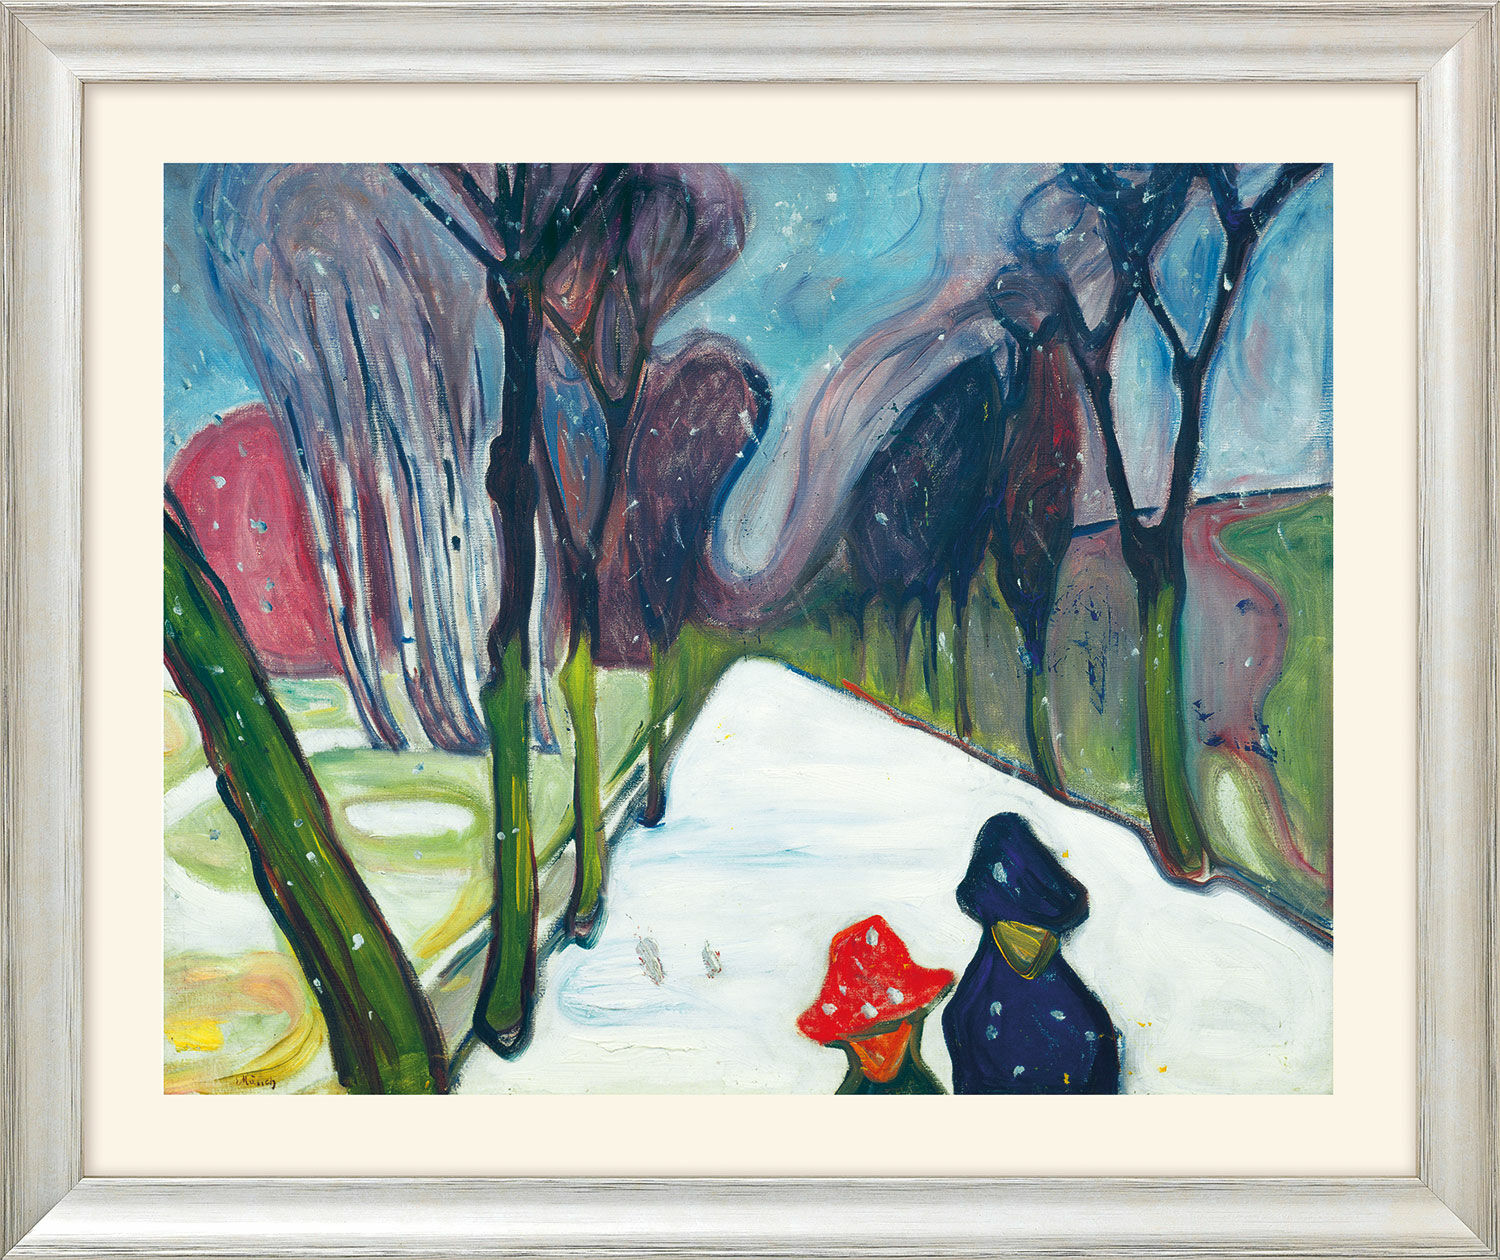 Picture "Avenue in Snowstorm" (1906) - from "Seasons Cycle", silver-coloured framed version by Edvard Munch